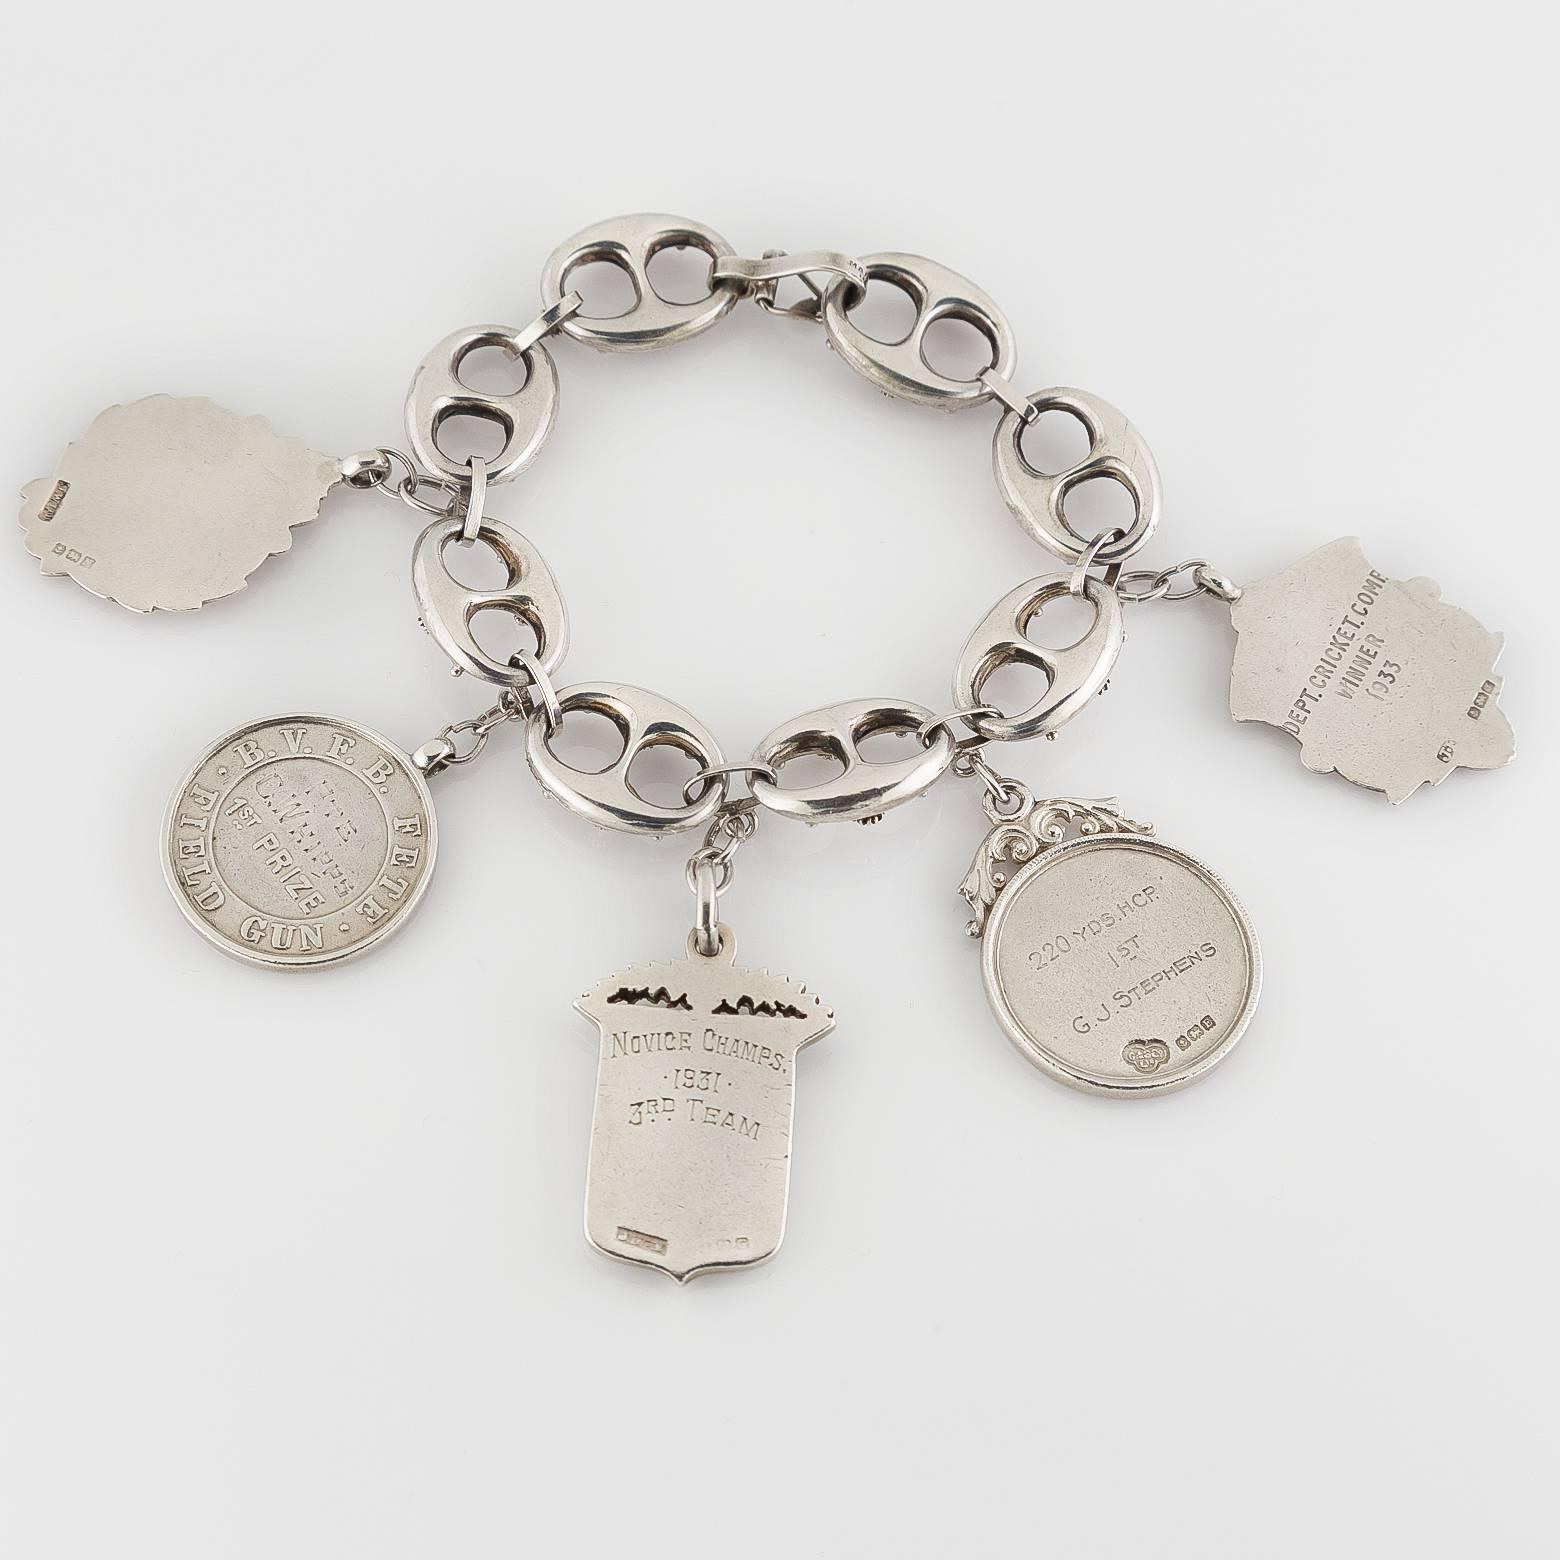 This English Victoiran sterling silver charm bracelet was made in the 1930's and the charms vary from time period- one is as old as 1912. The theme with this charm bracelet is one of sports and has images of soccer and cricket. Fun, sporty and